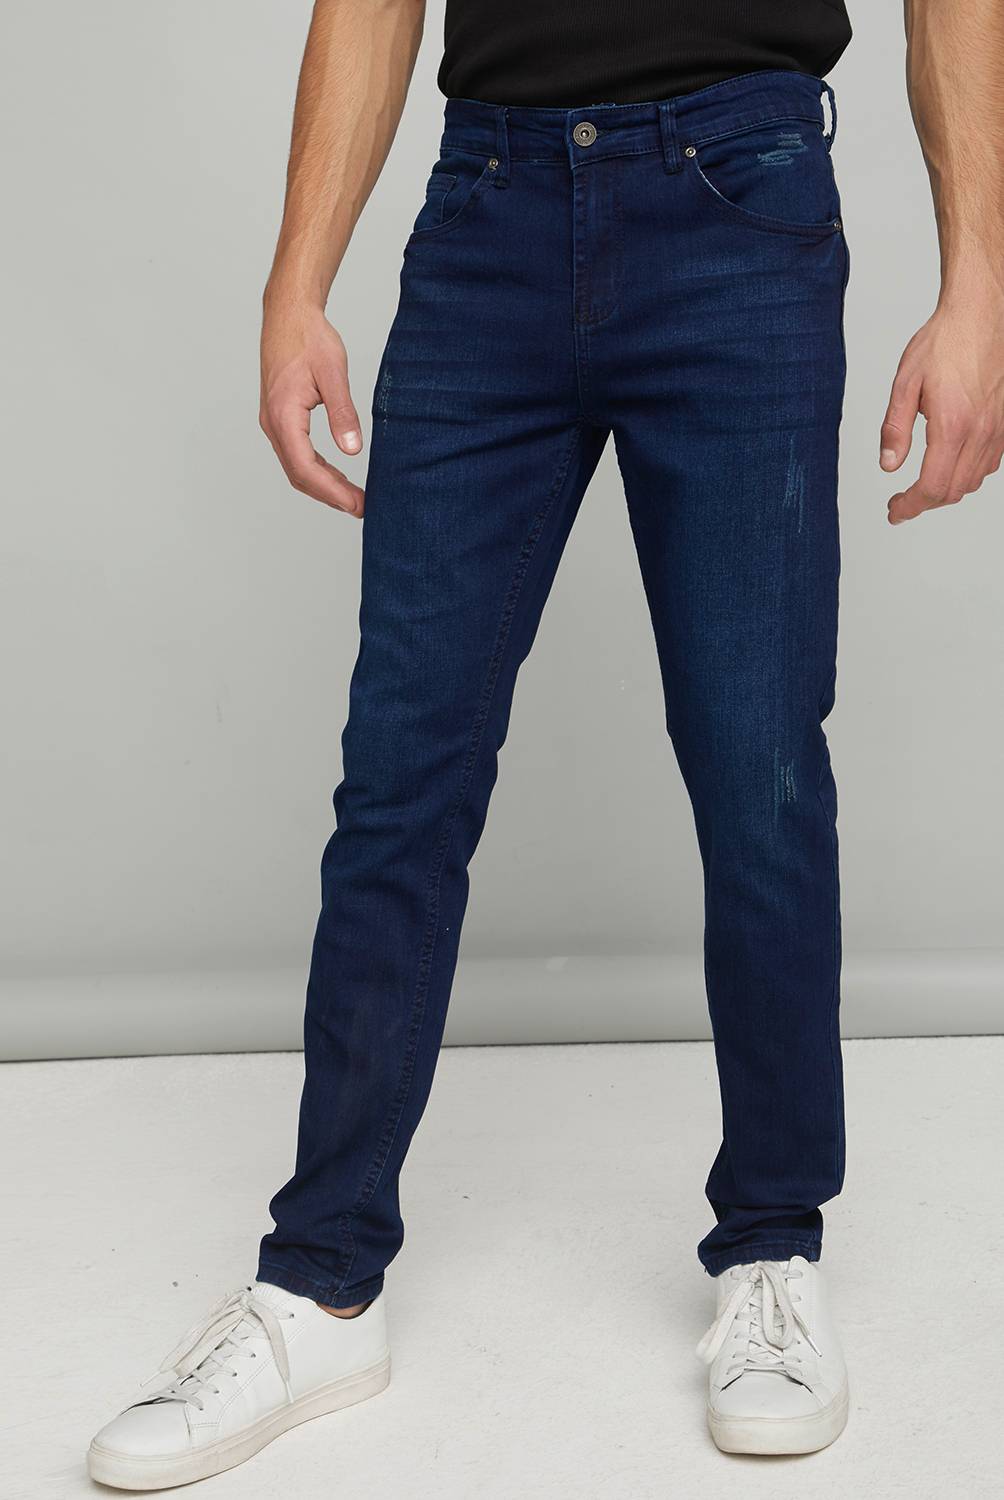 BEARCLIFF - Jeans Skinny Fit Hombre Bearcliff